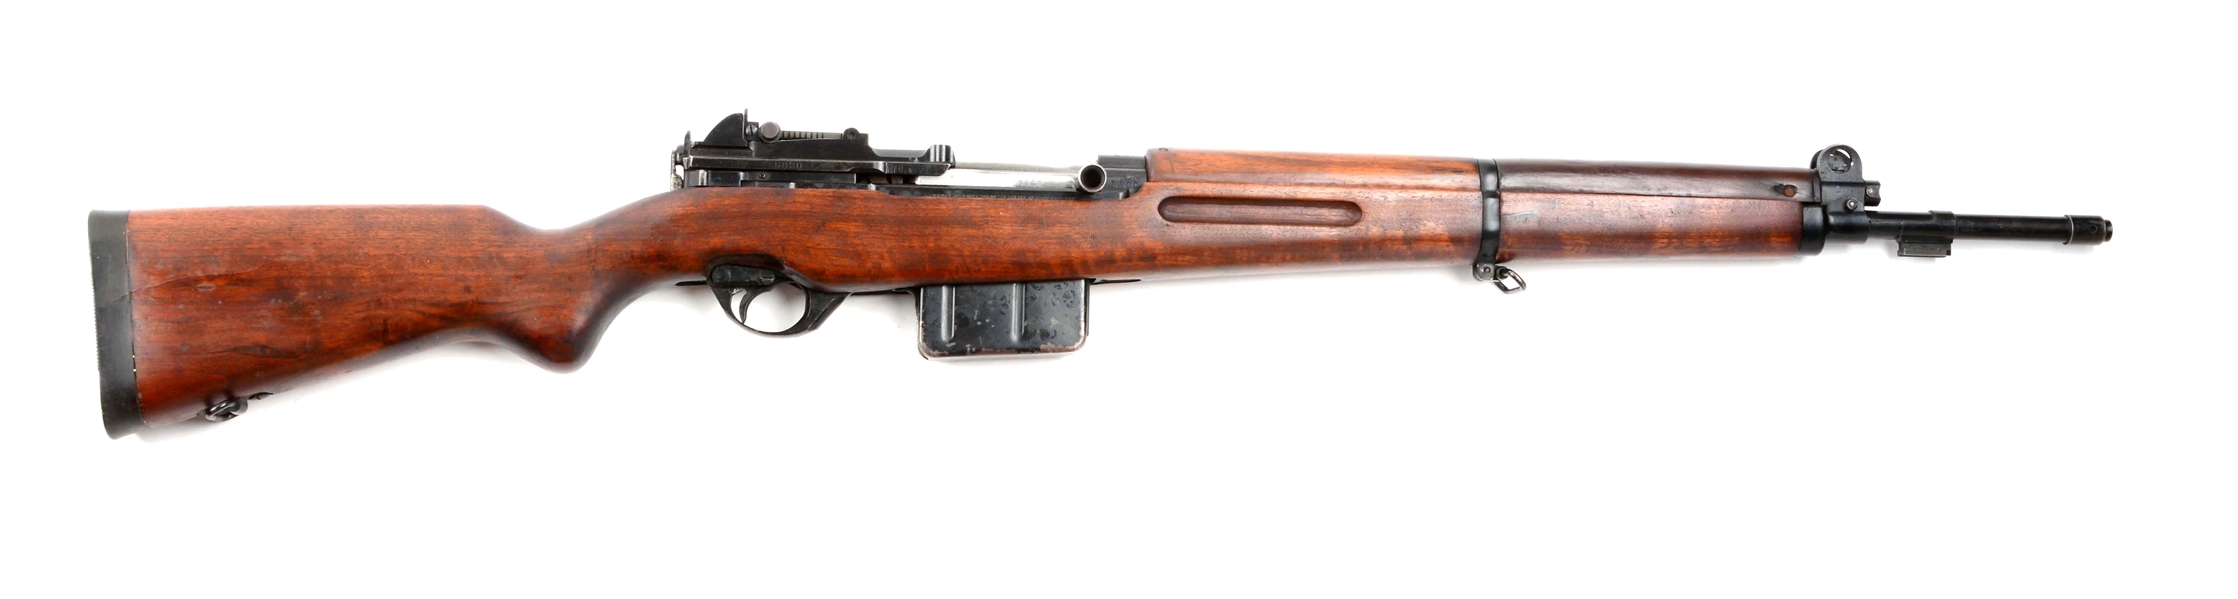 (C) FN MODEL 1949 LUXEMBOURG CONTRACT SEMIAUTOMATIC RIFLE.